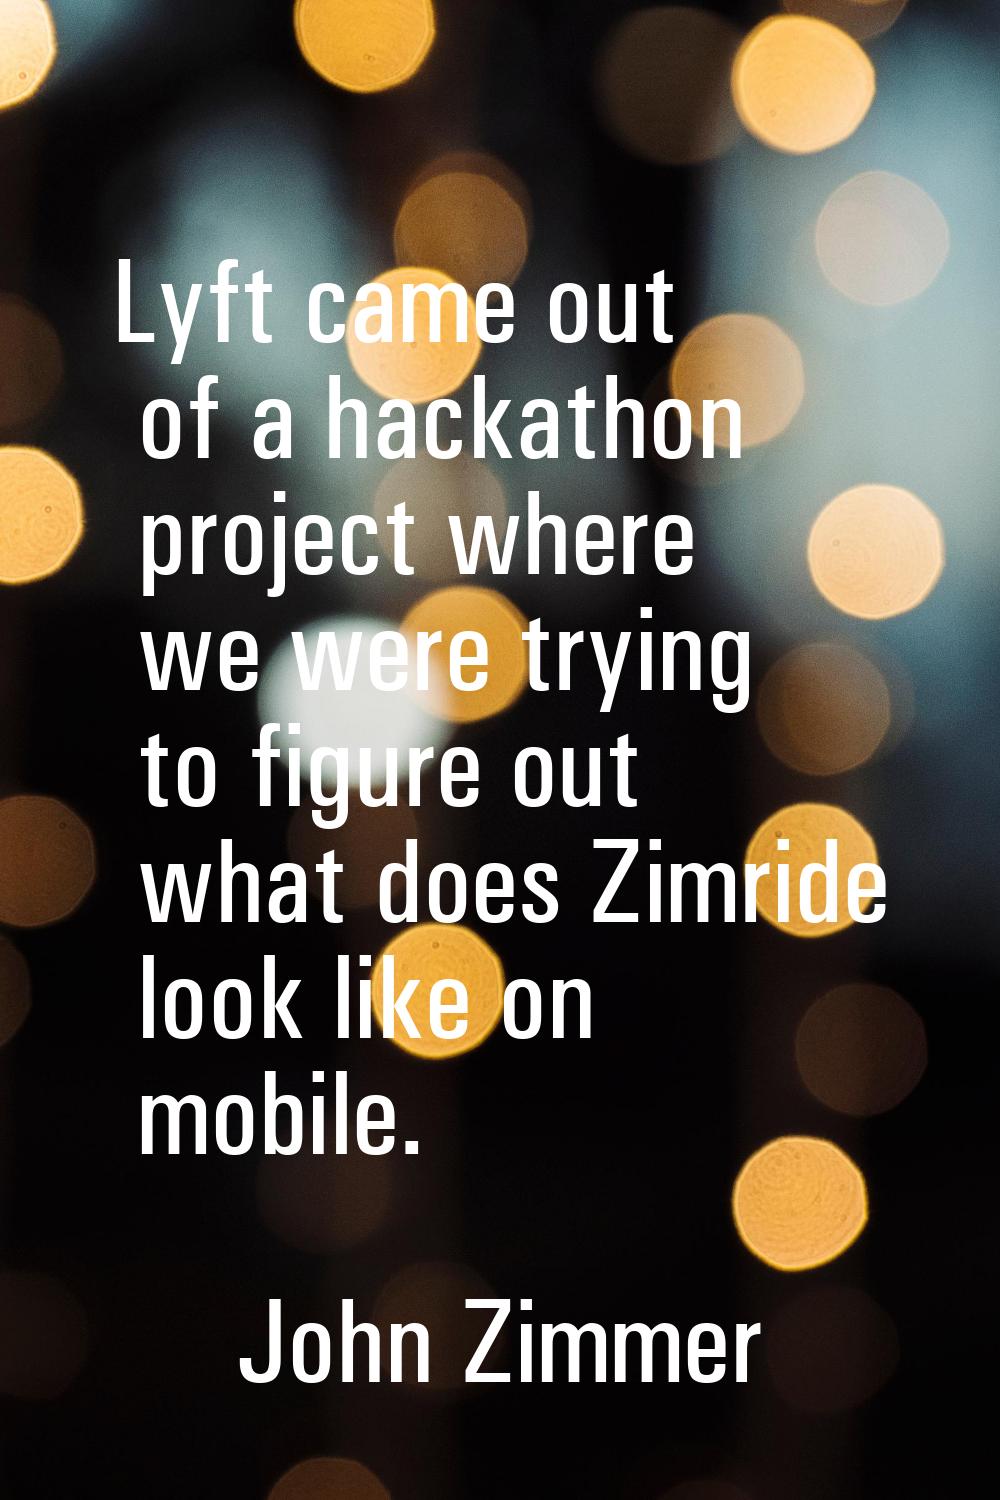 Lyft came out of a hackathon project where we were trying to figure out what does Zimride look like